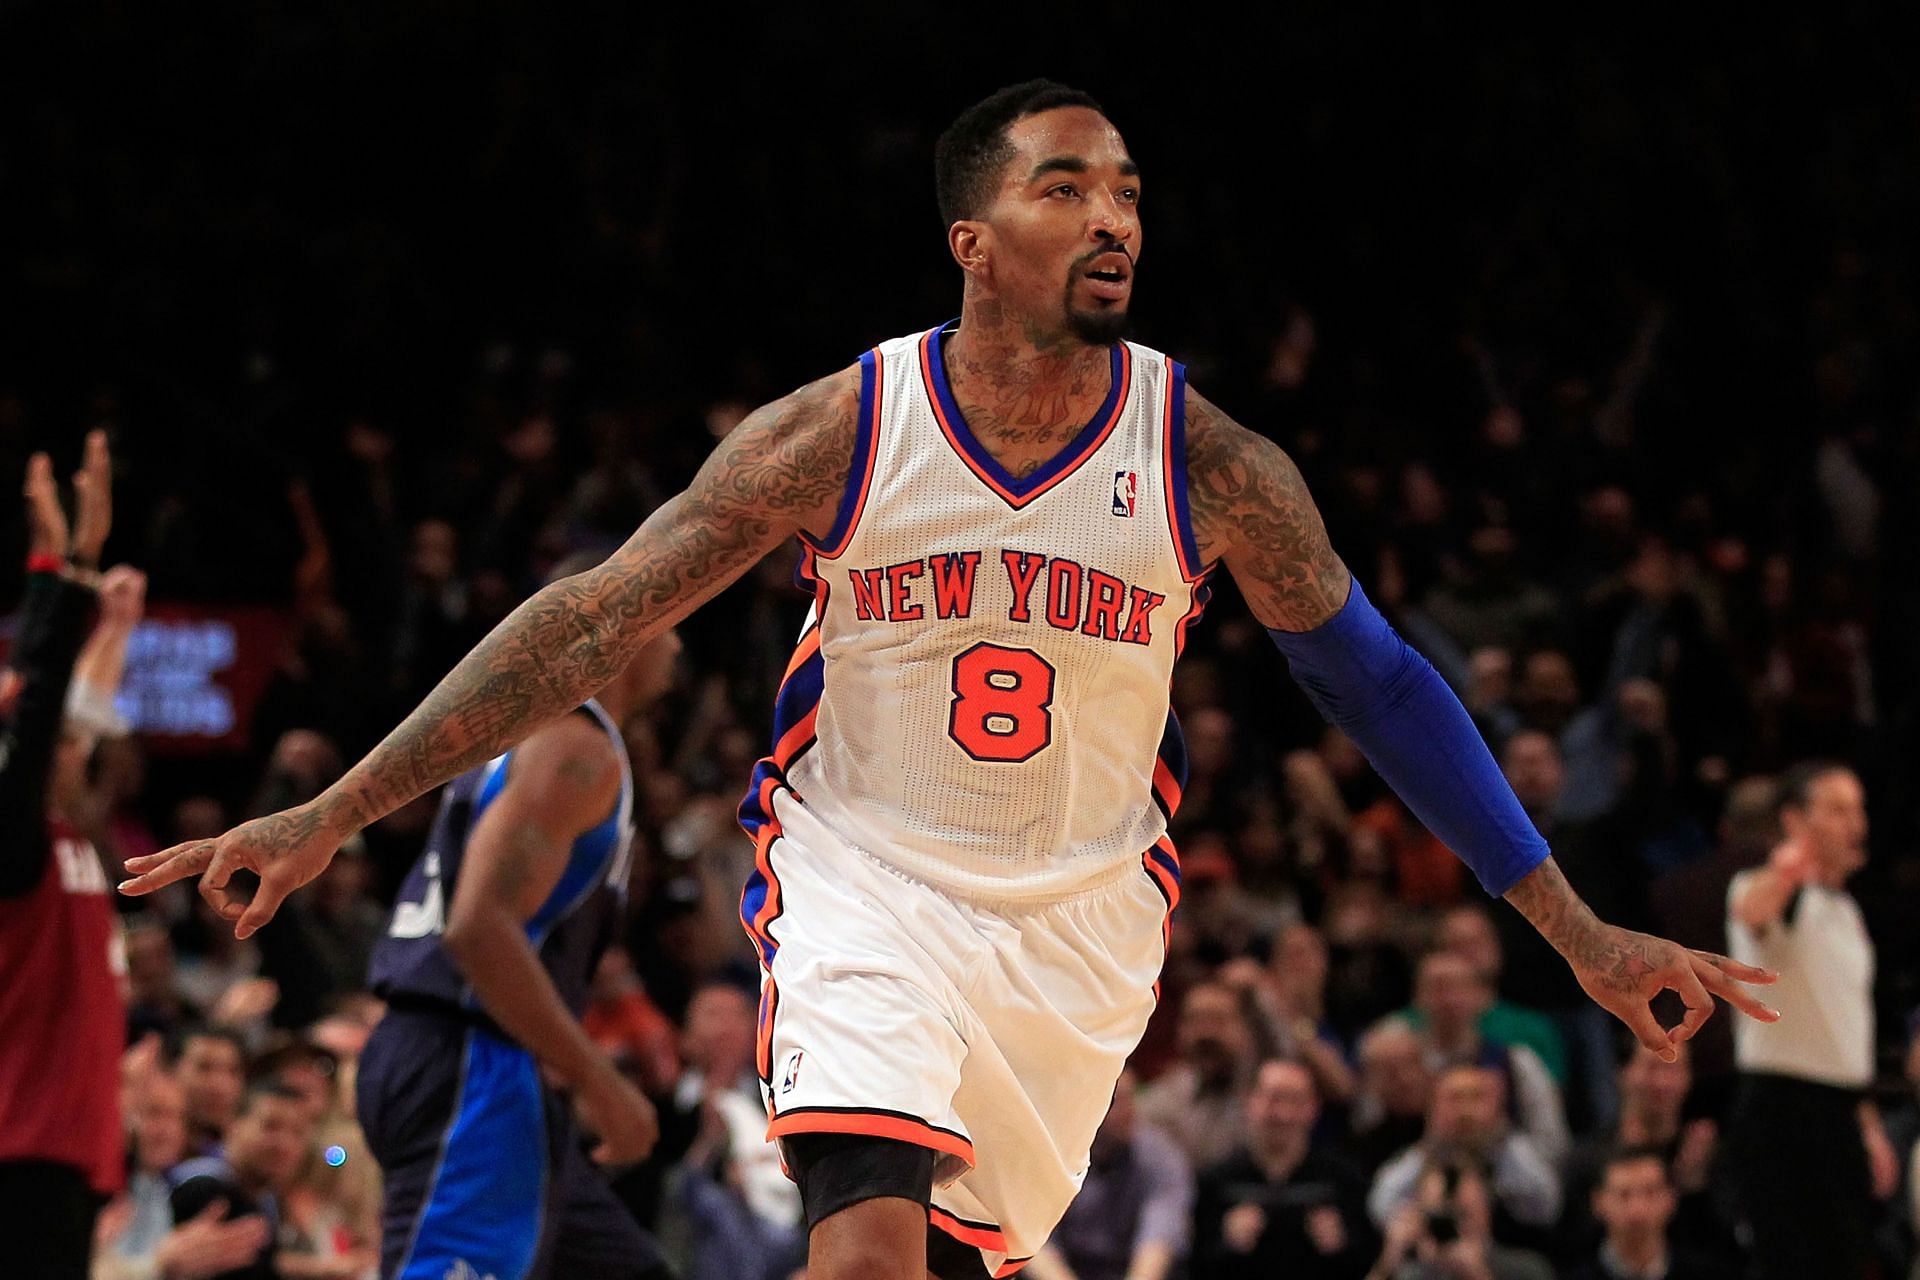 J.R. Smith during his New York Knicks days